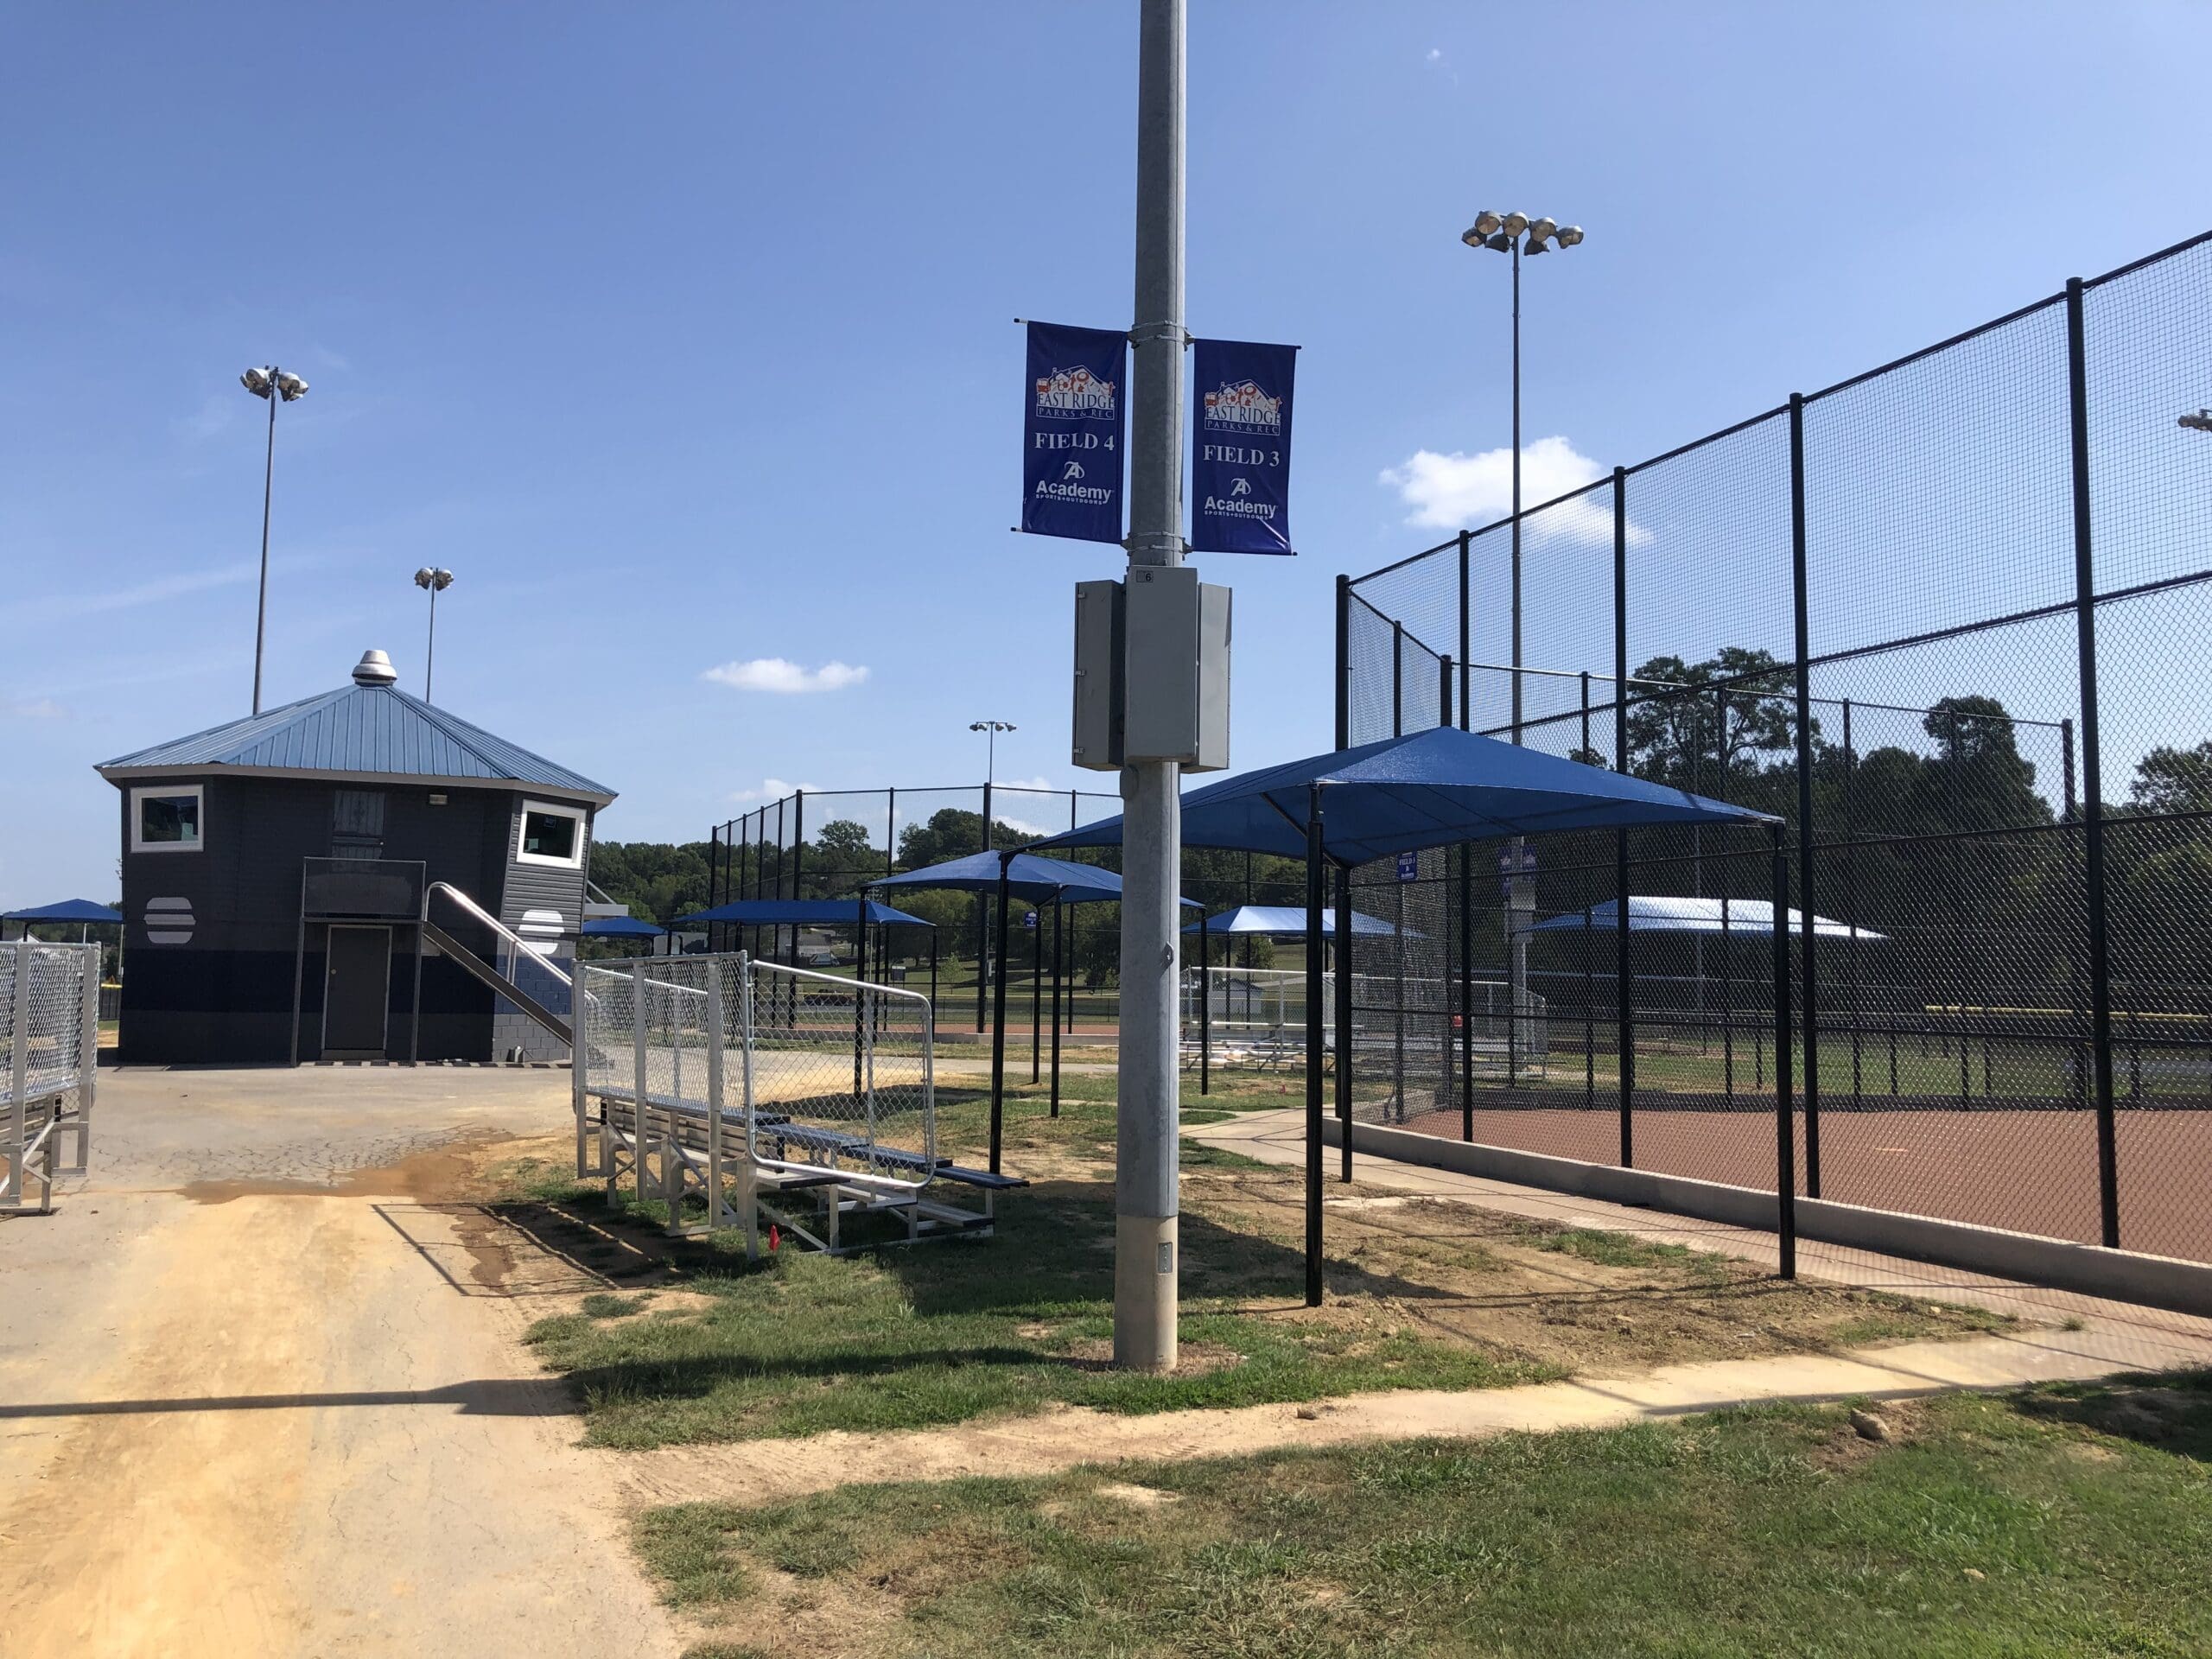 shade structures at baseball stadiums protect viewers